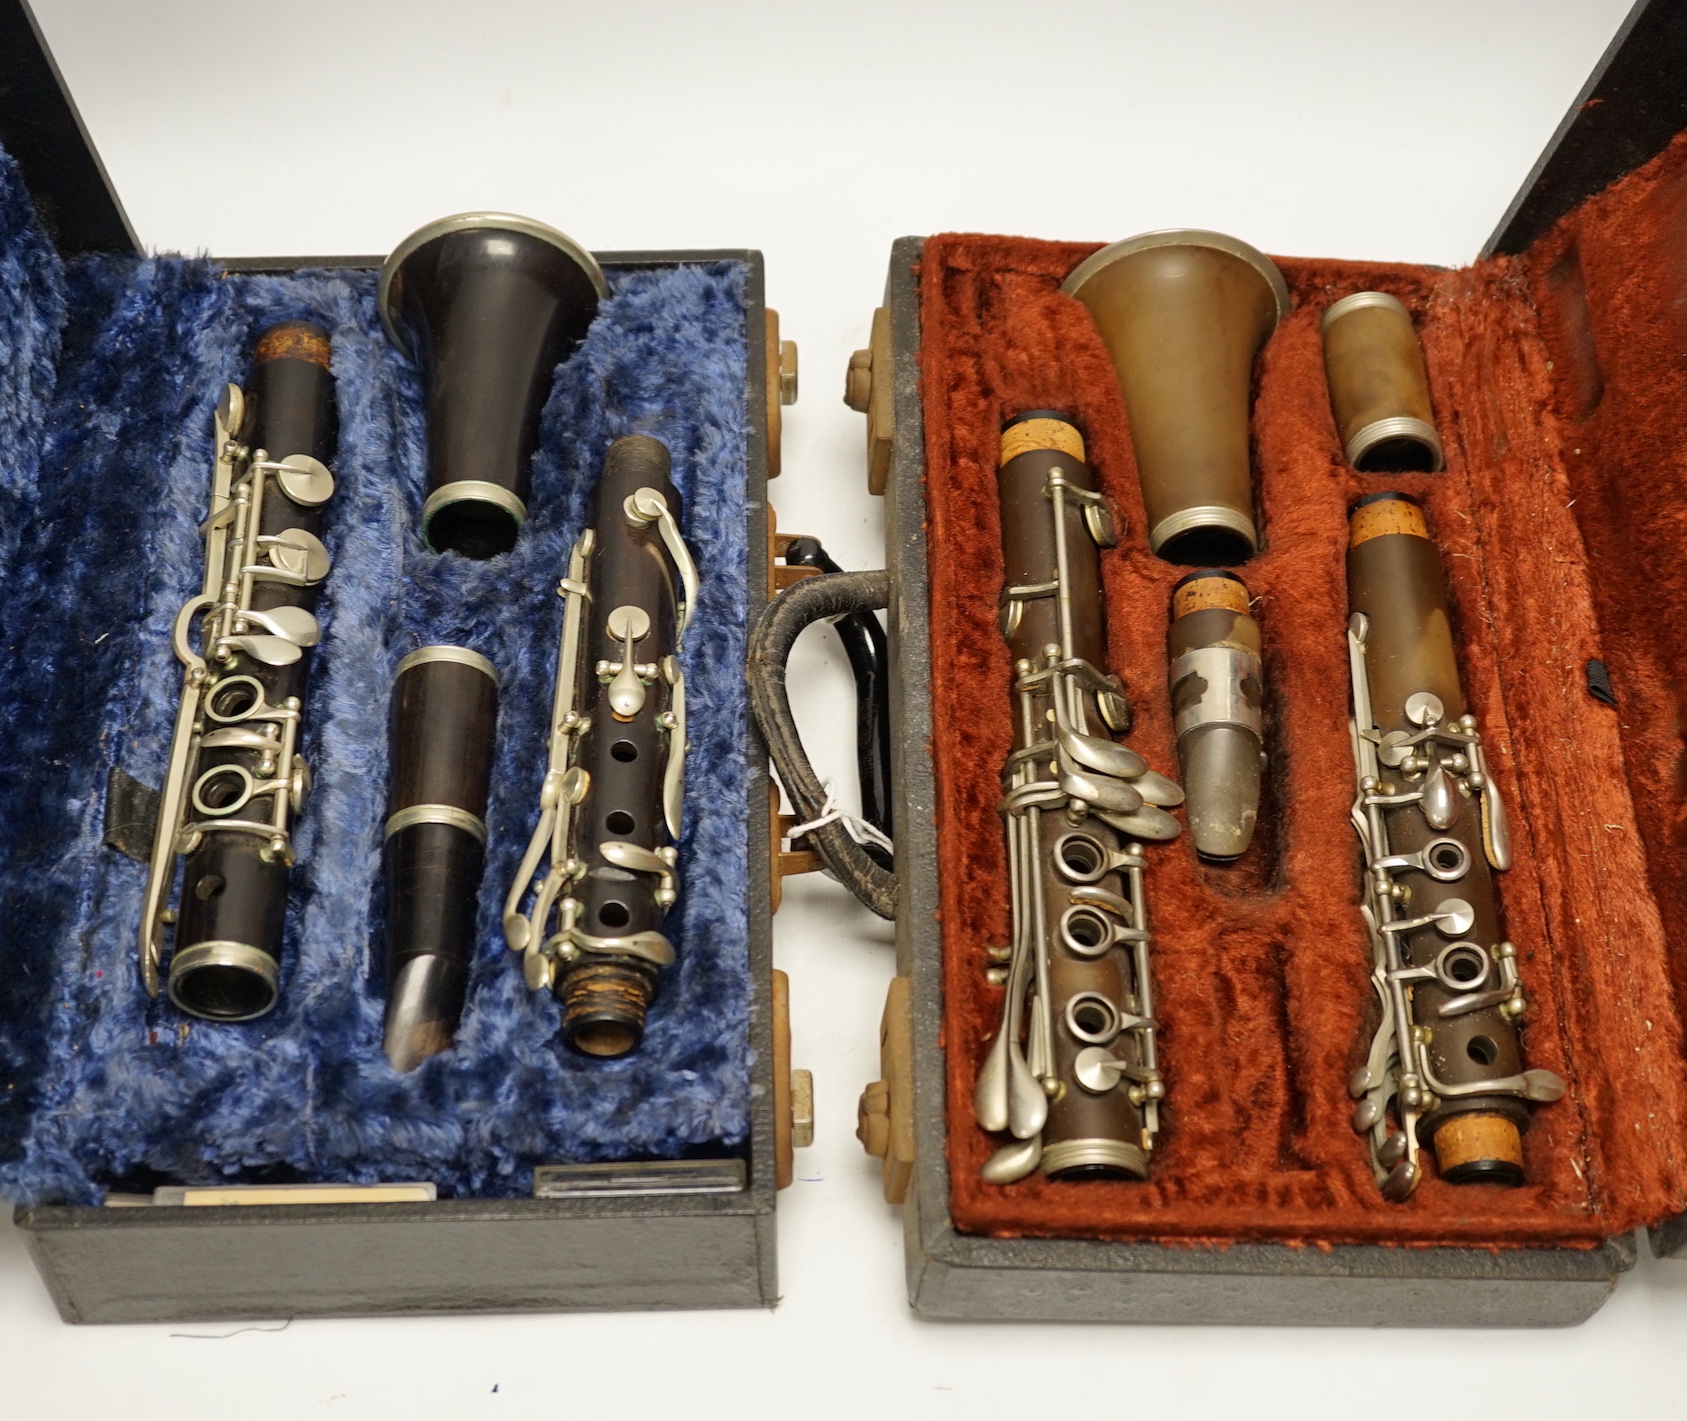 Two cased unmarked clarinets with early key systems, one mid 19th century in rosewood, one with light brown Bakelite body